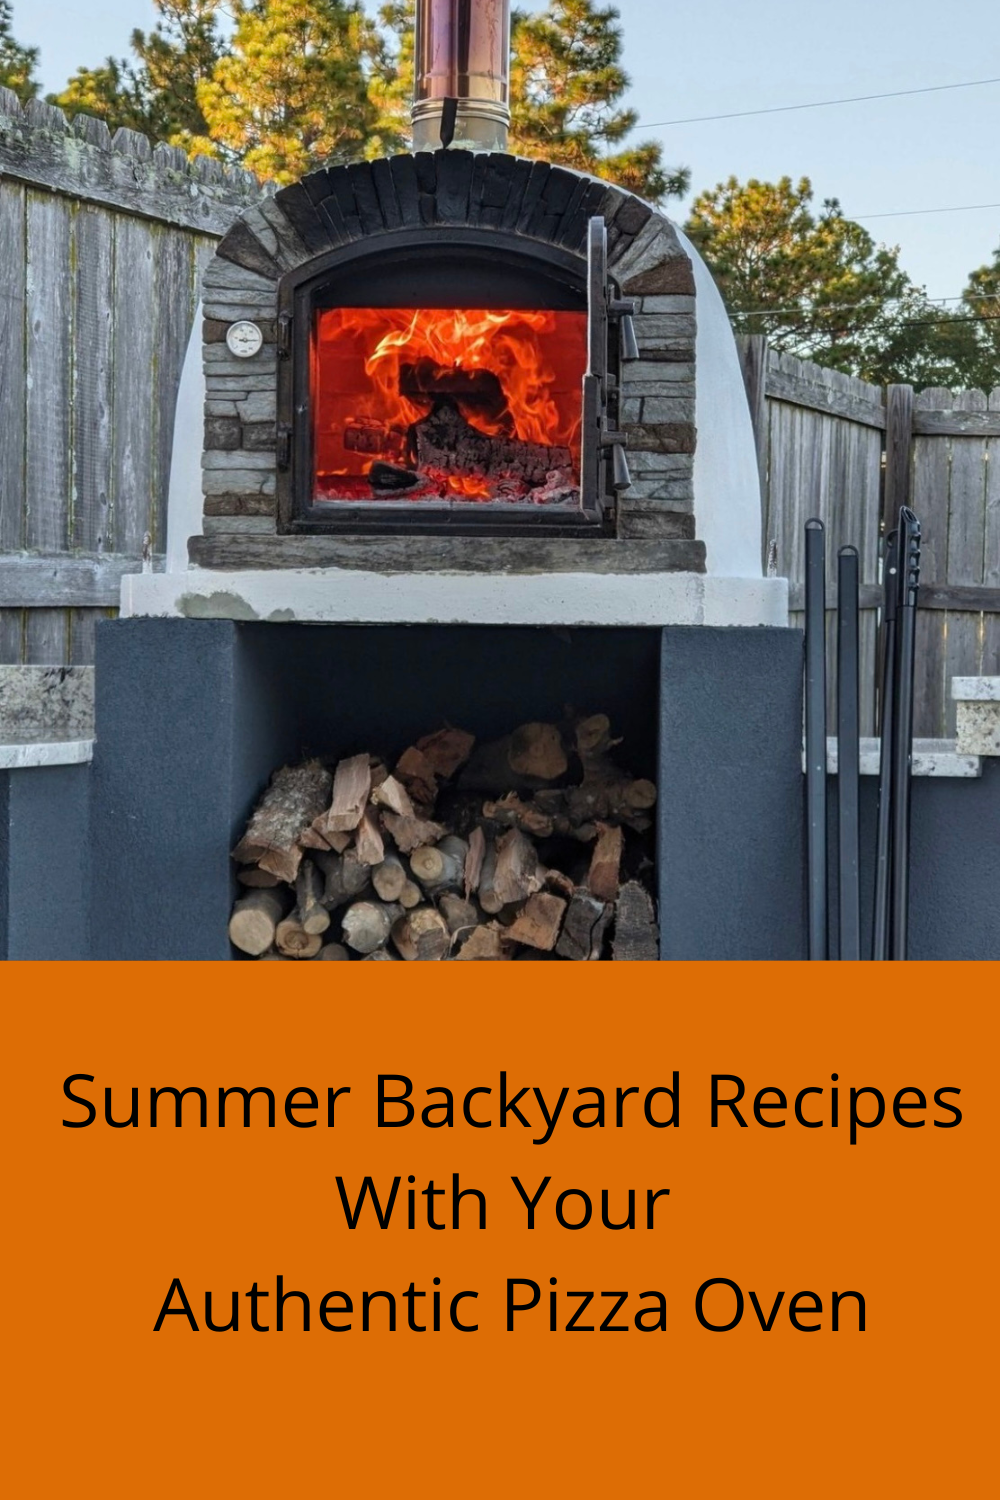 Summer Backyard Recipes With Your Authentic Pizza Oven